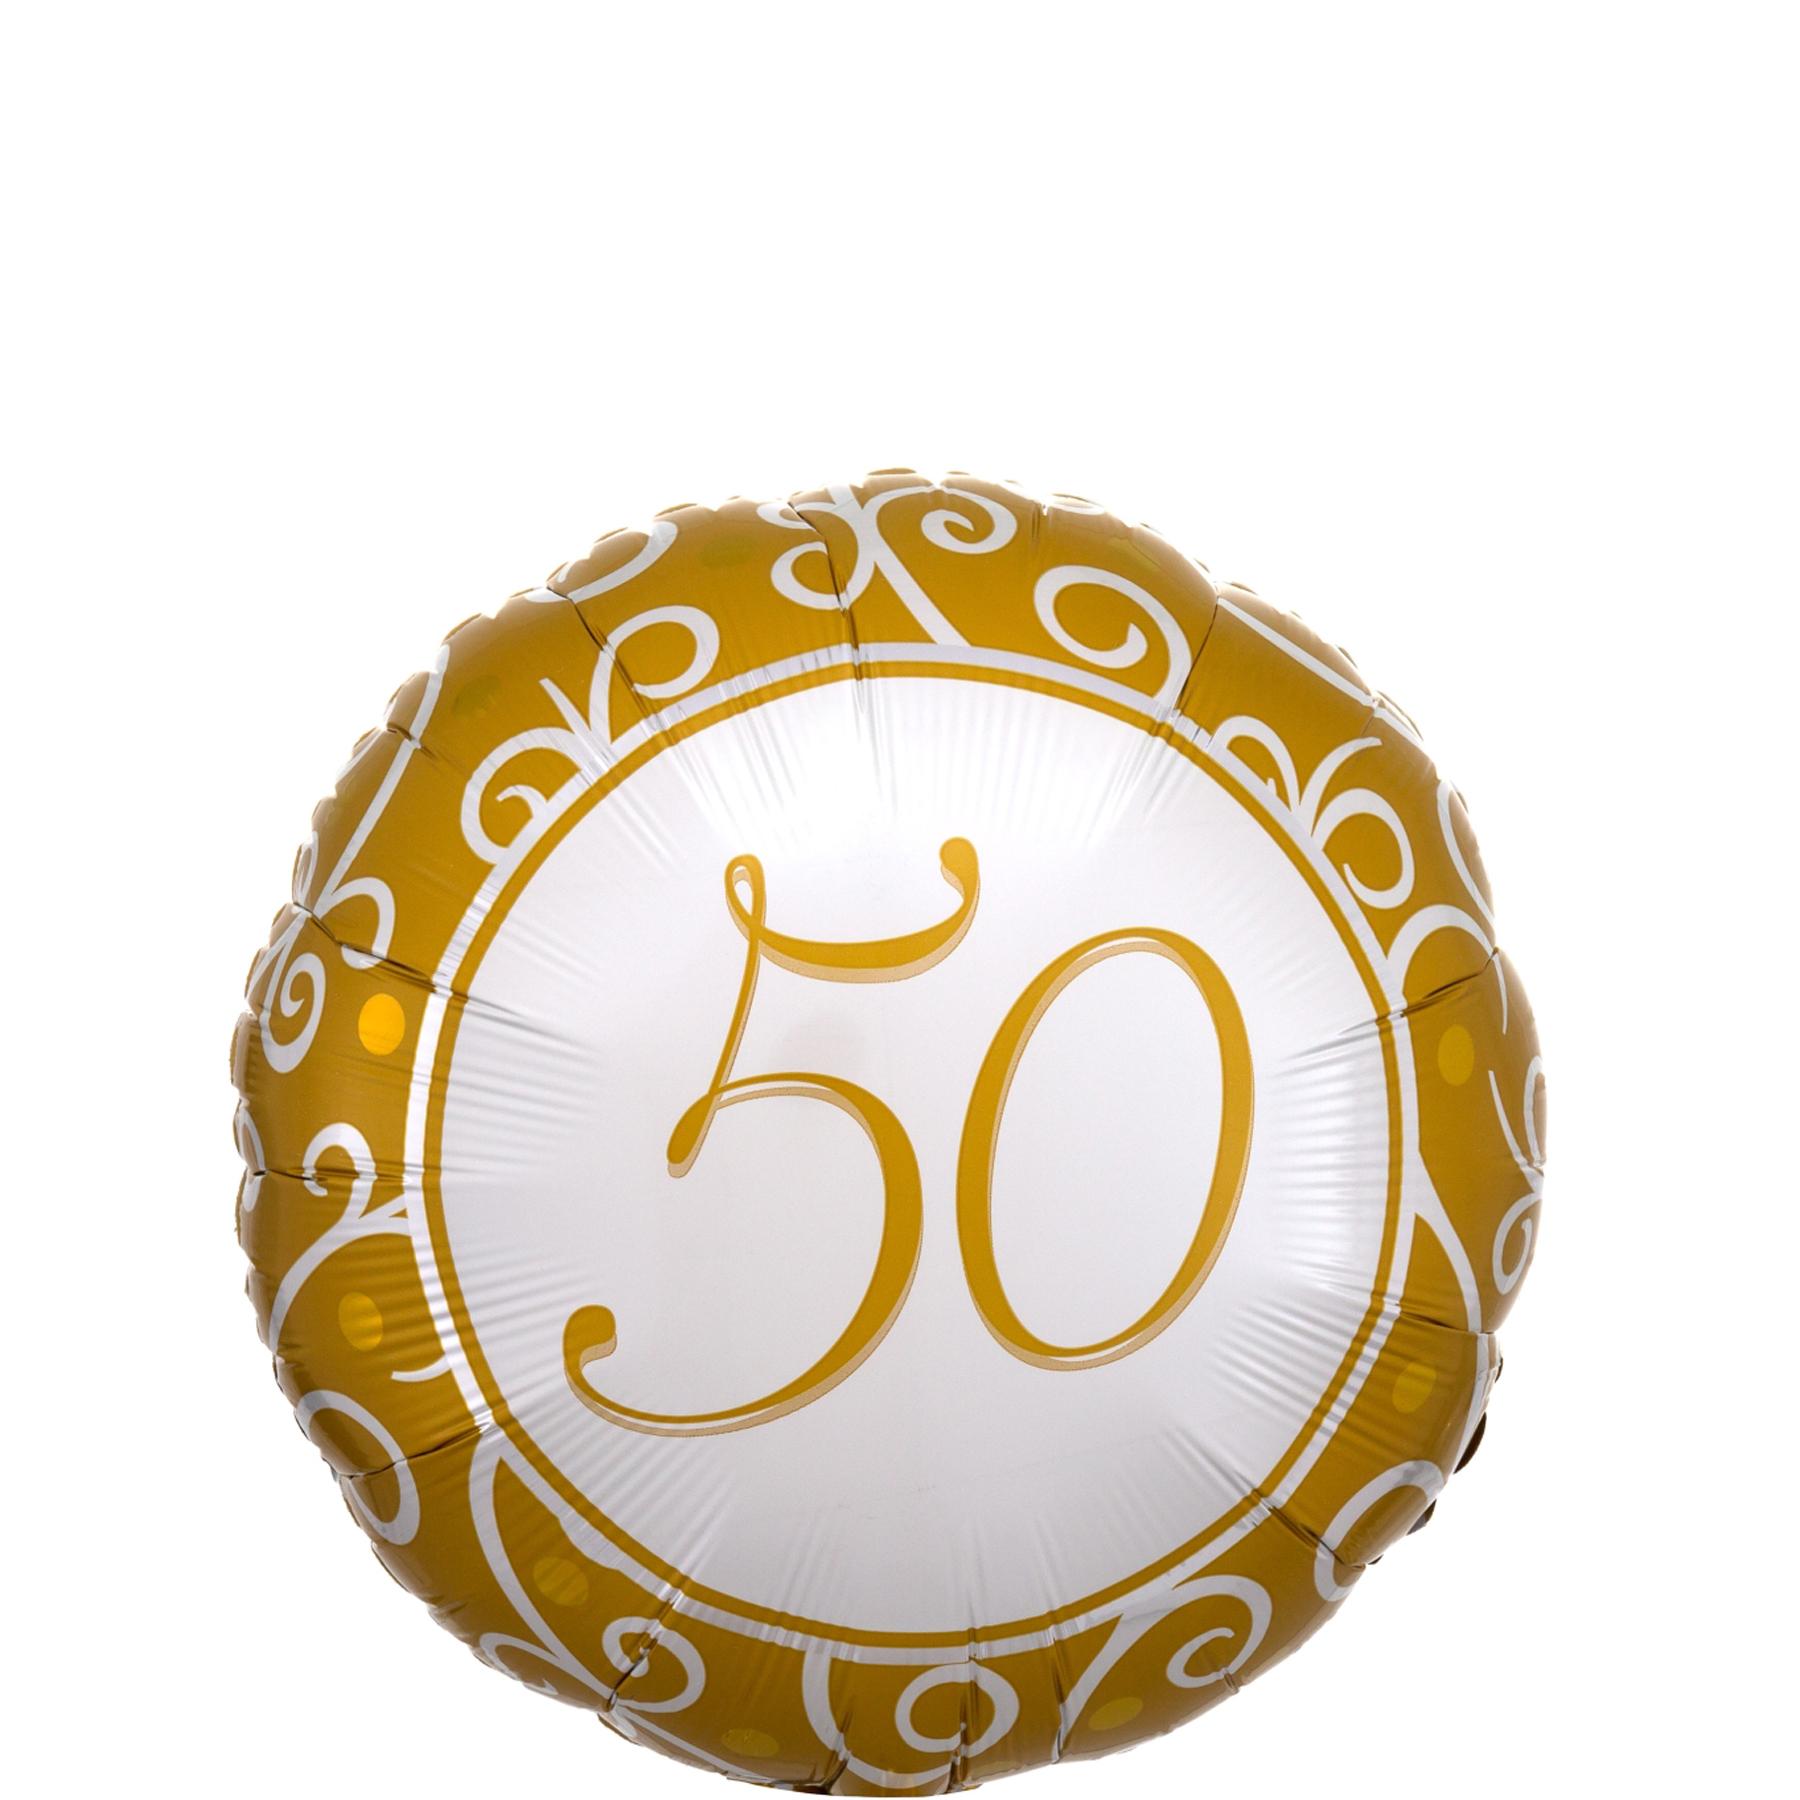 50th Anniversary Round Balloon 45cm Balloons & Streamers - Party Centre - Party Centre